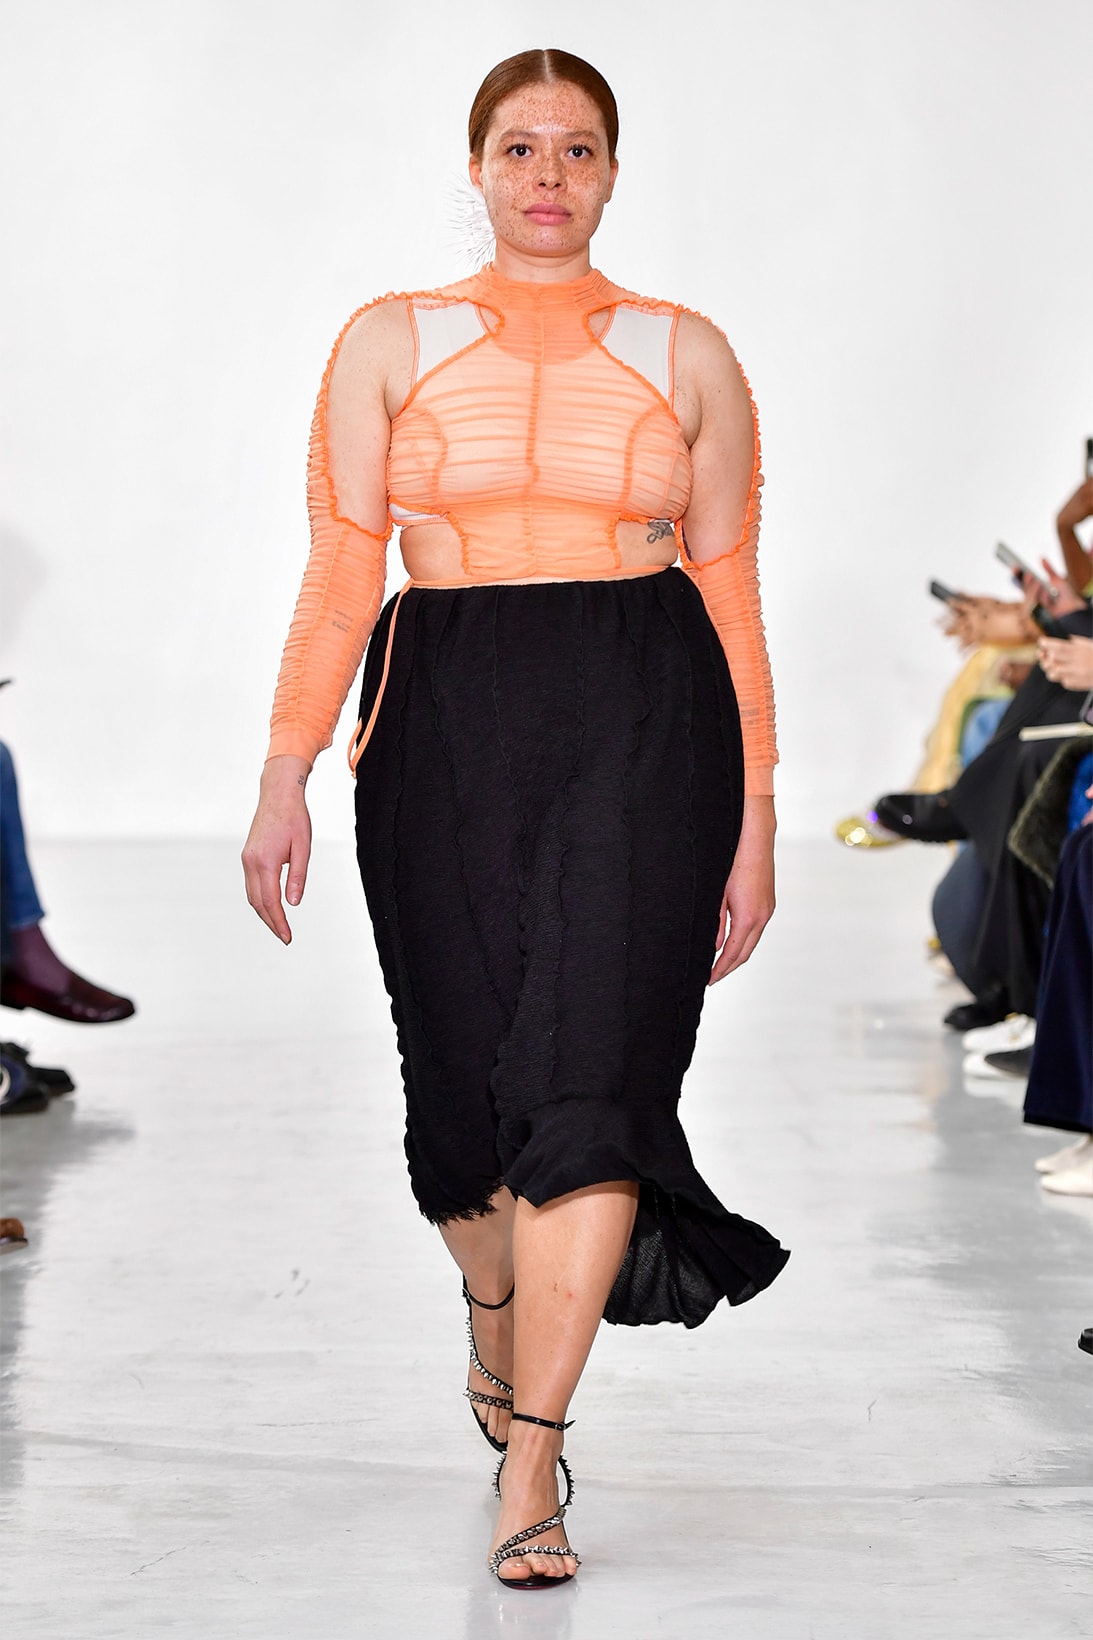 Ester Manas Fall Winter Collection Size Inclusivity Cut-Outs Fashion Week Runway Show Photos Bustier Top Skirt Orange Black